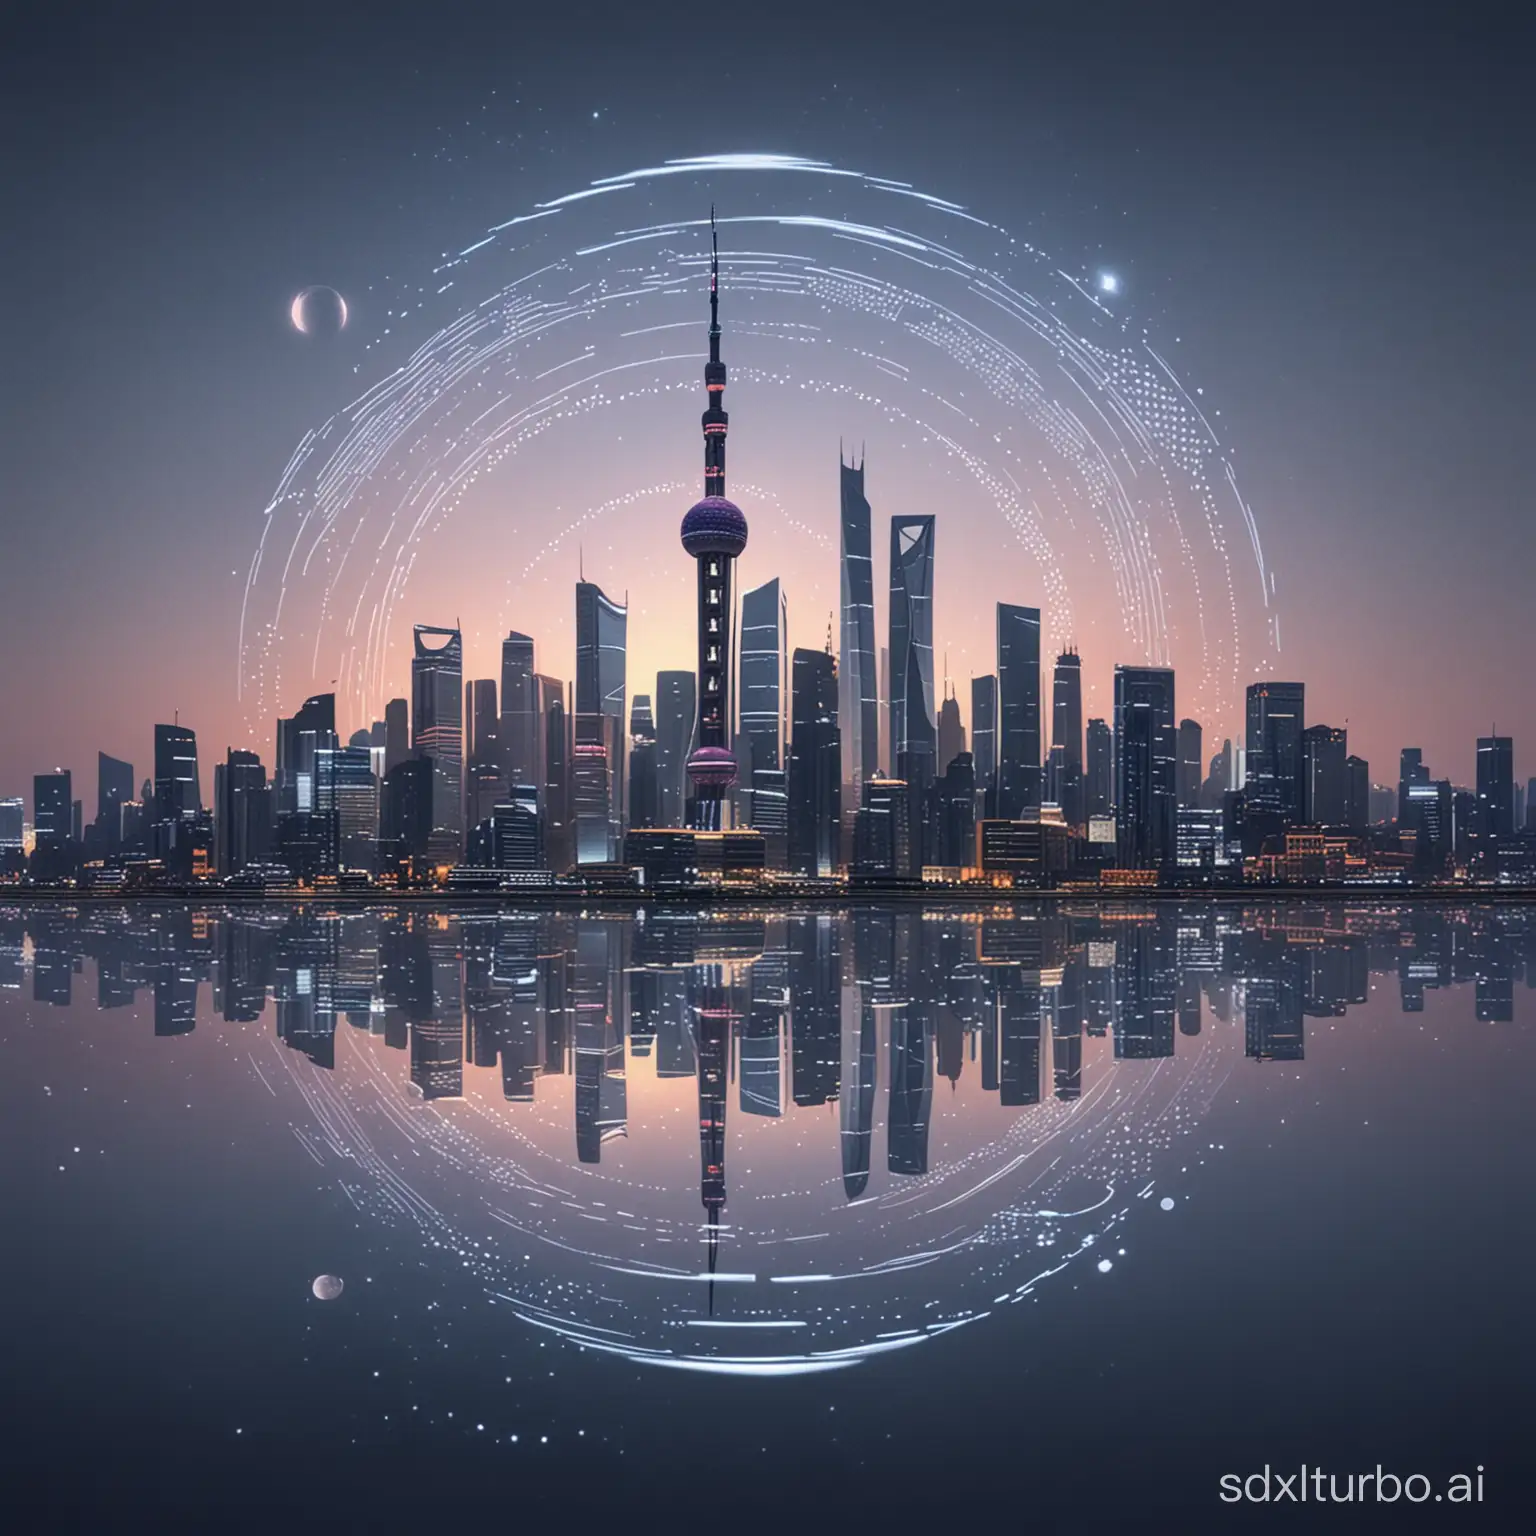 panoramic view of a city Shanghai skyline at sunset in Holographic Zen style, with night sky navy and moonlight silver Zen circles and lines in holographic forms